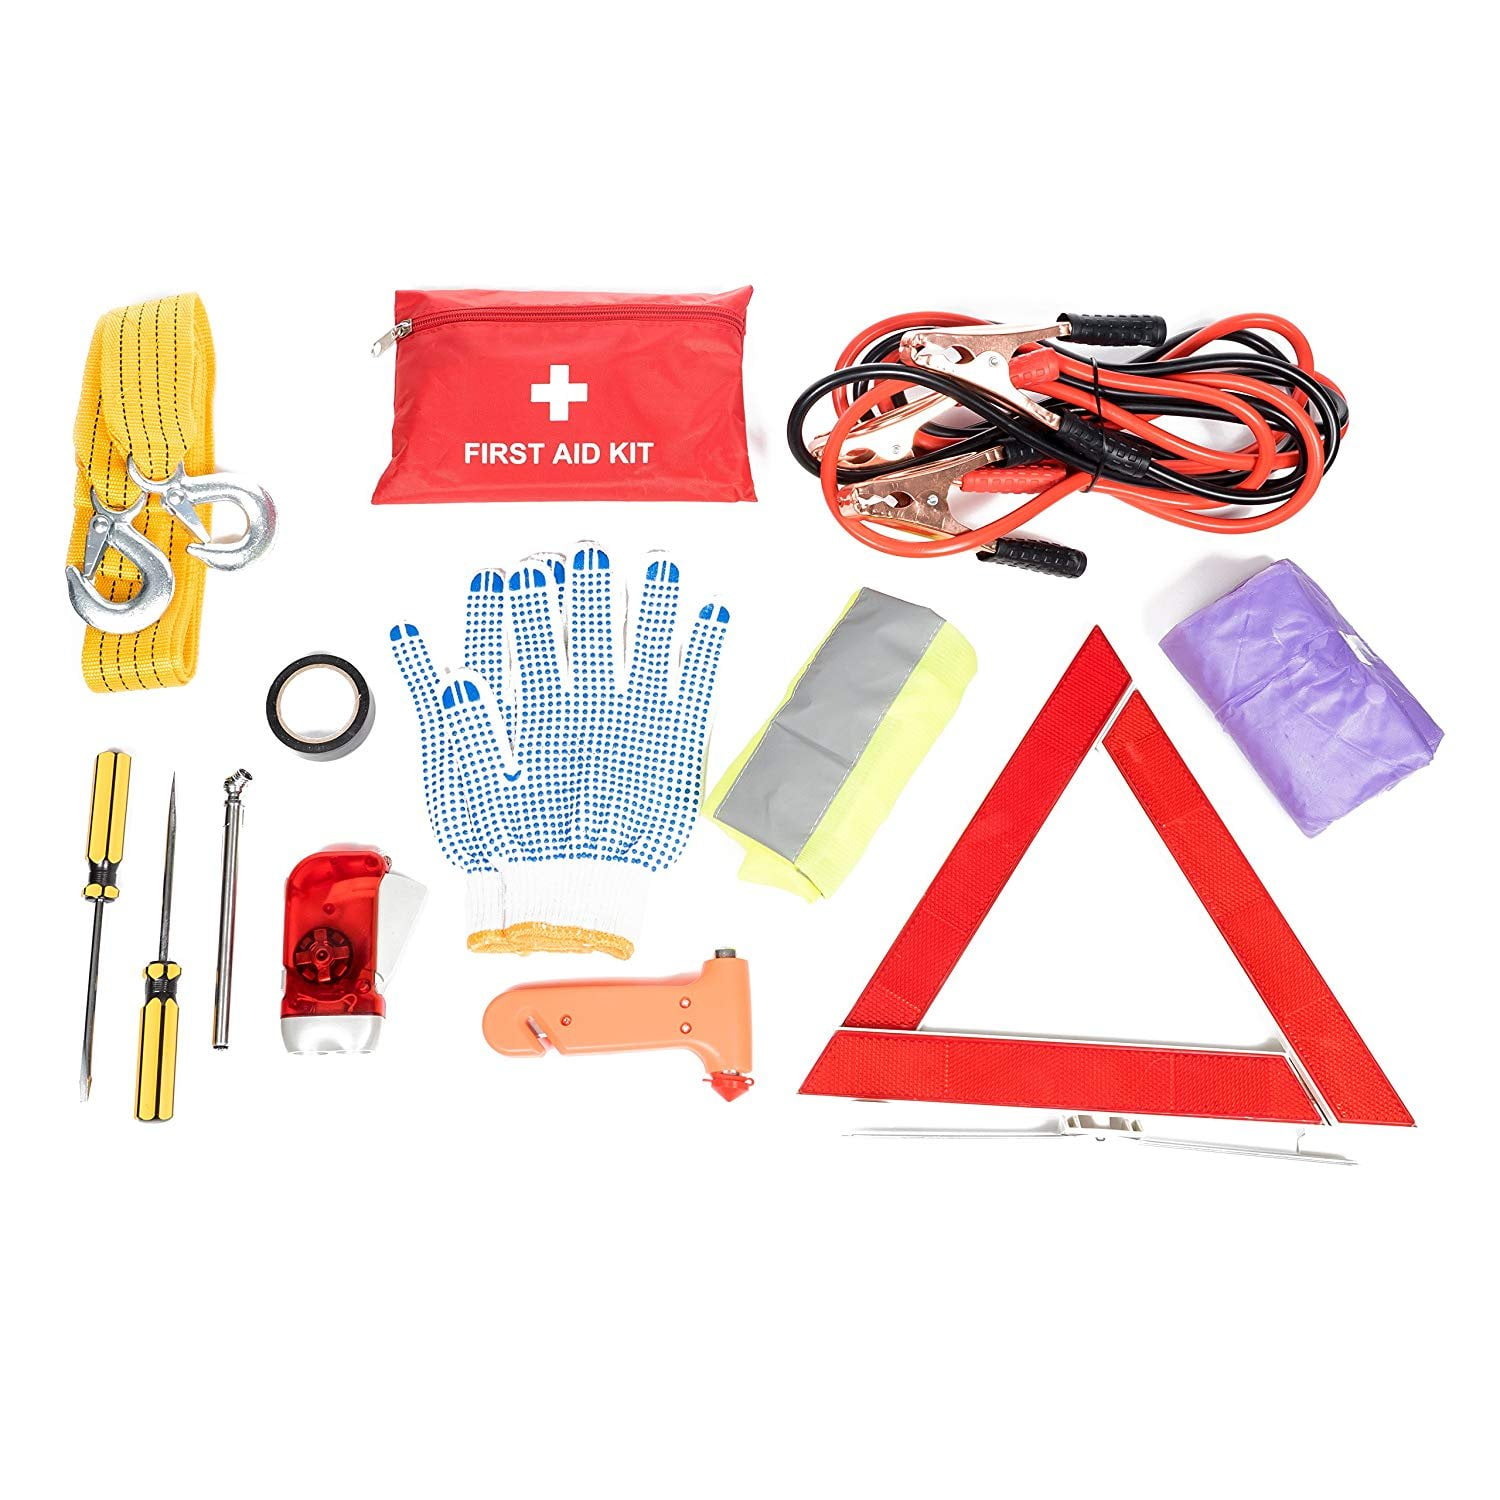 Roadside Assistance Car Emergency Kit - First Aid Kit, Jumper Cables, Tow  Rope, LED Flash Light, Rain Coat, Tire Pressure Gauge, Safety Vest & More  Ideal Winter Accessory For Your Car, Truck